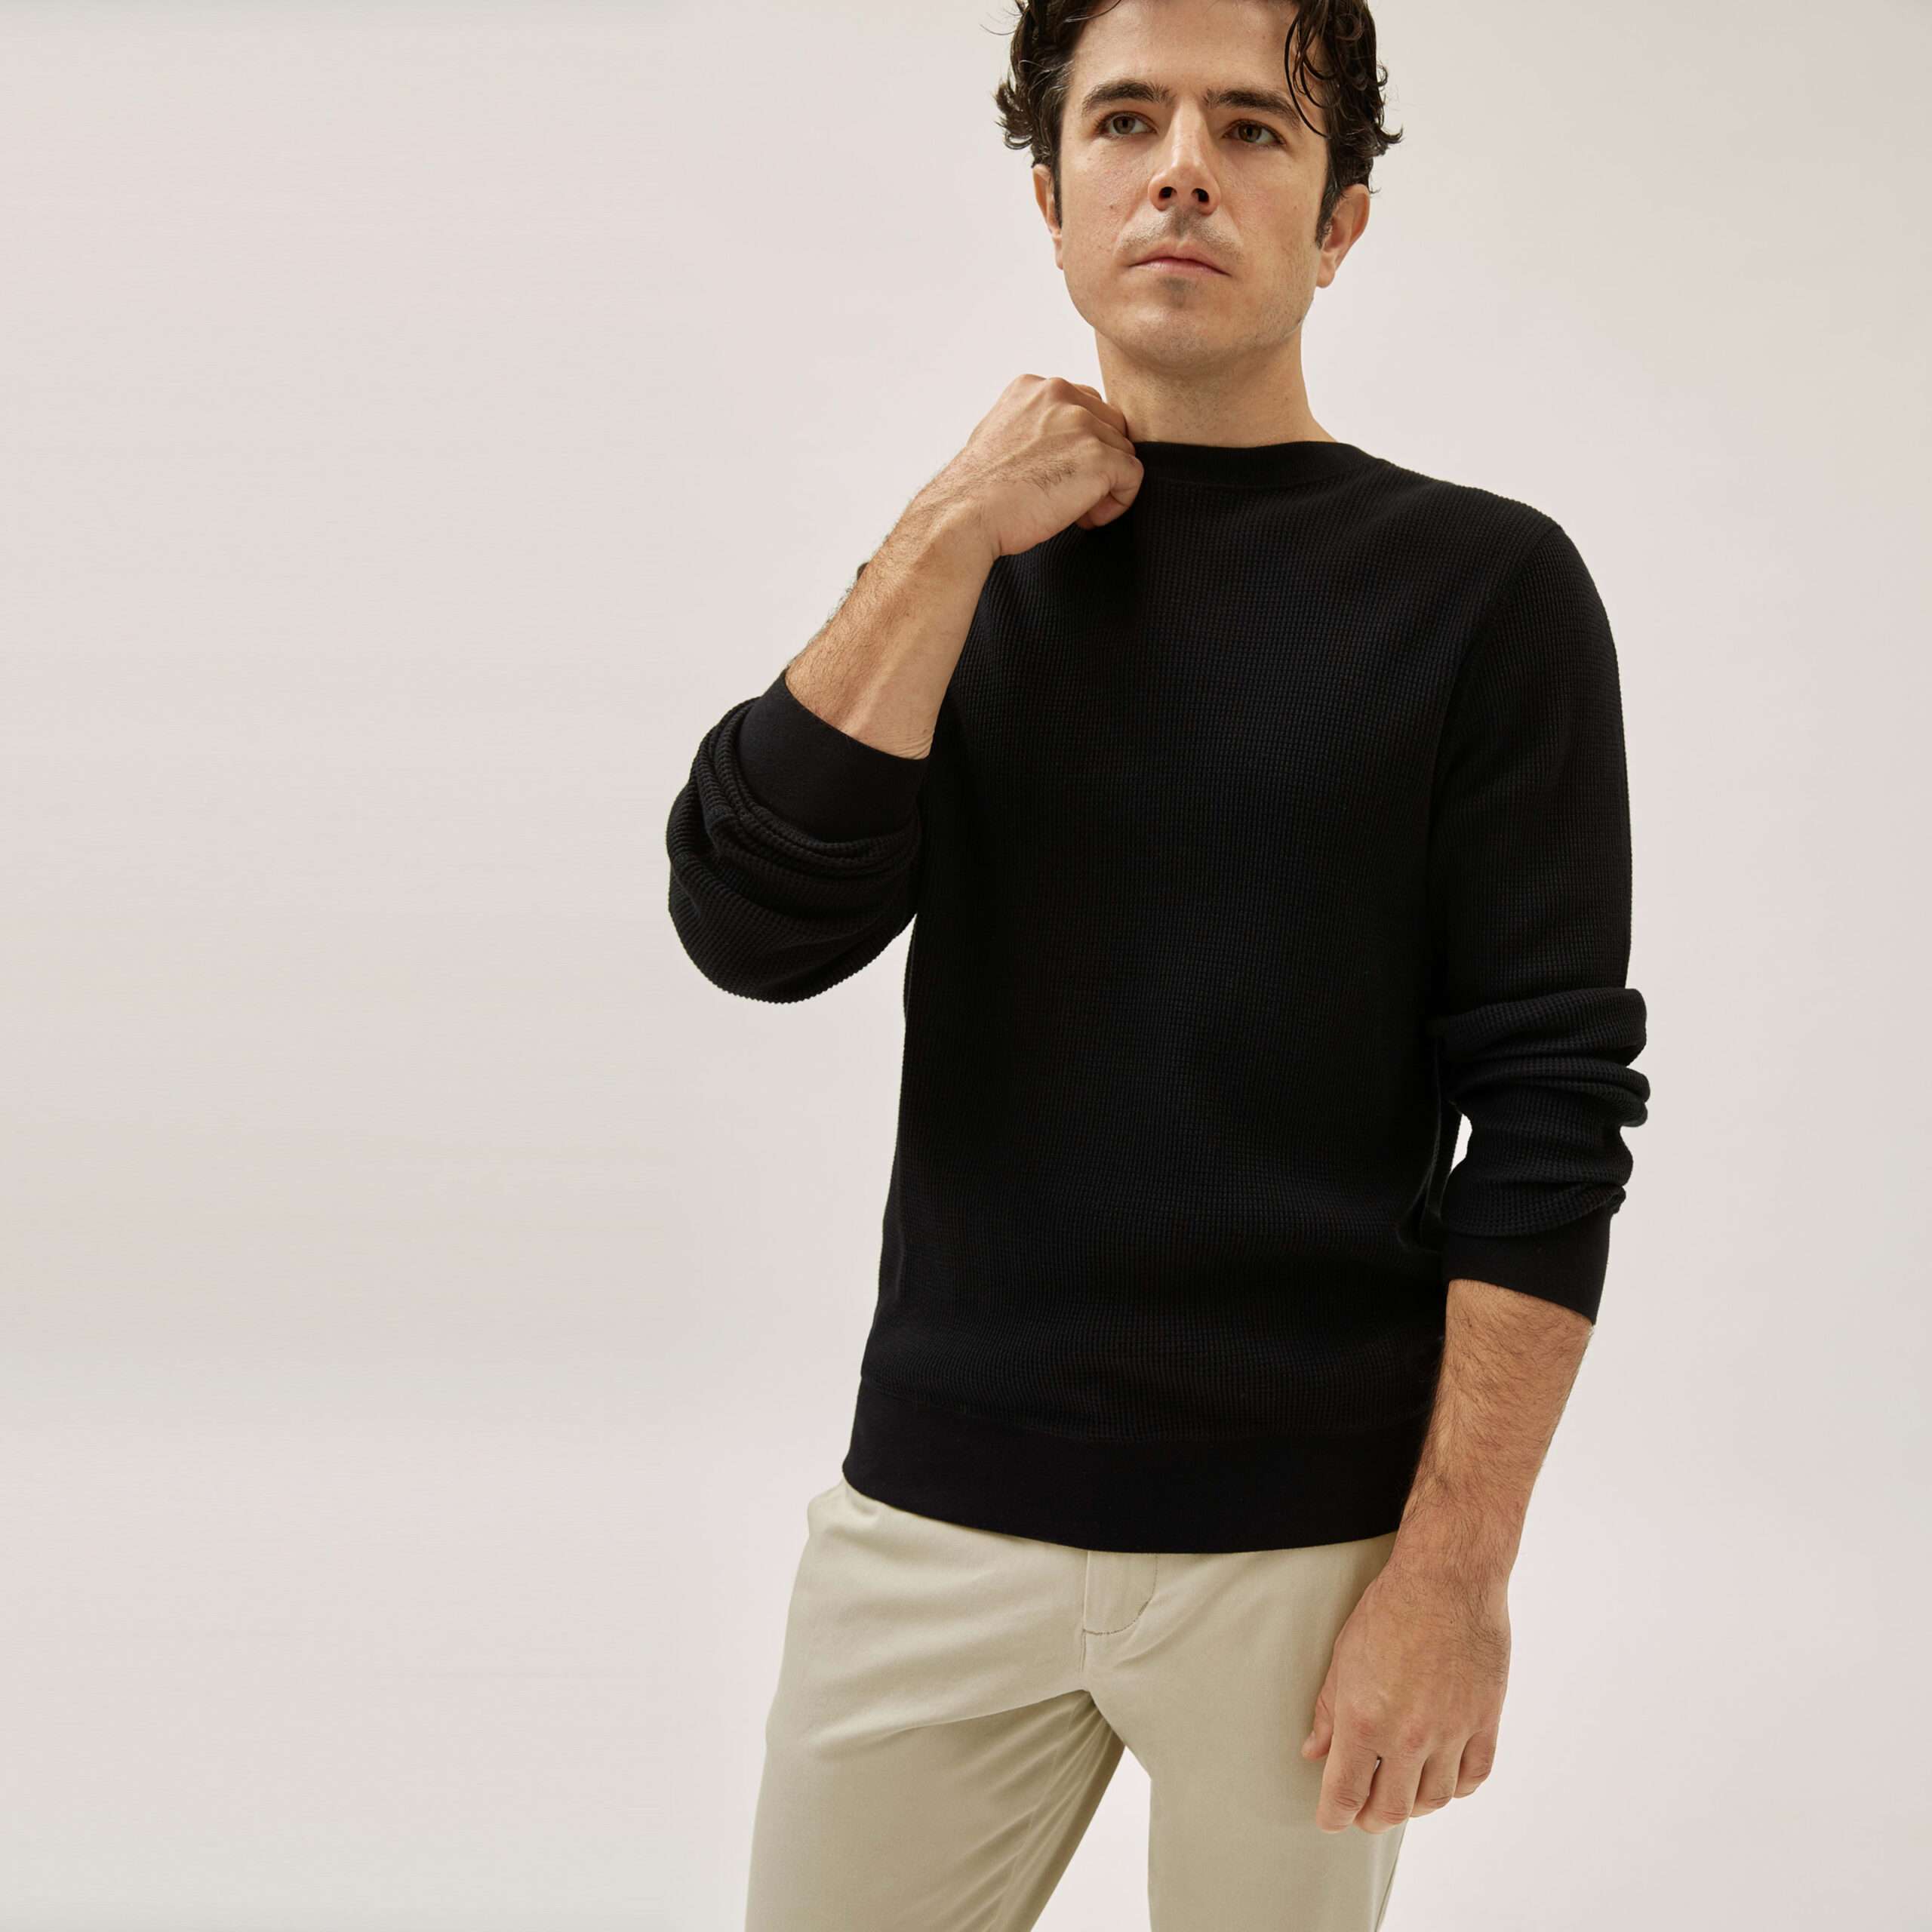 Men&#8217;s Waffle Long-Sleeve Crew T-Shirt by Everlane in Black